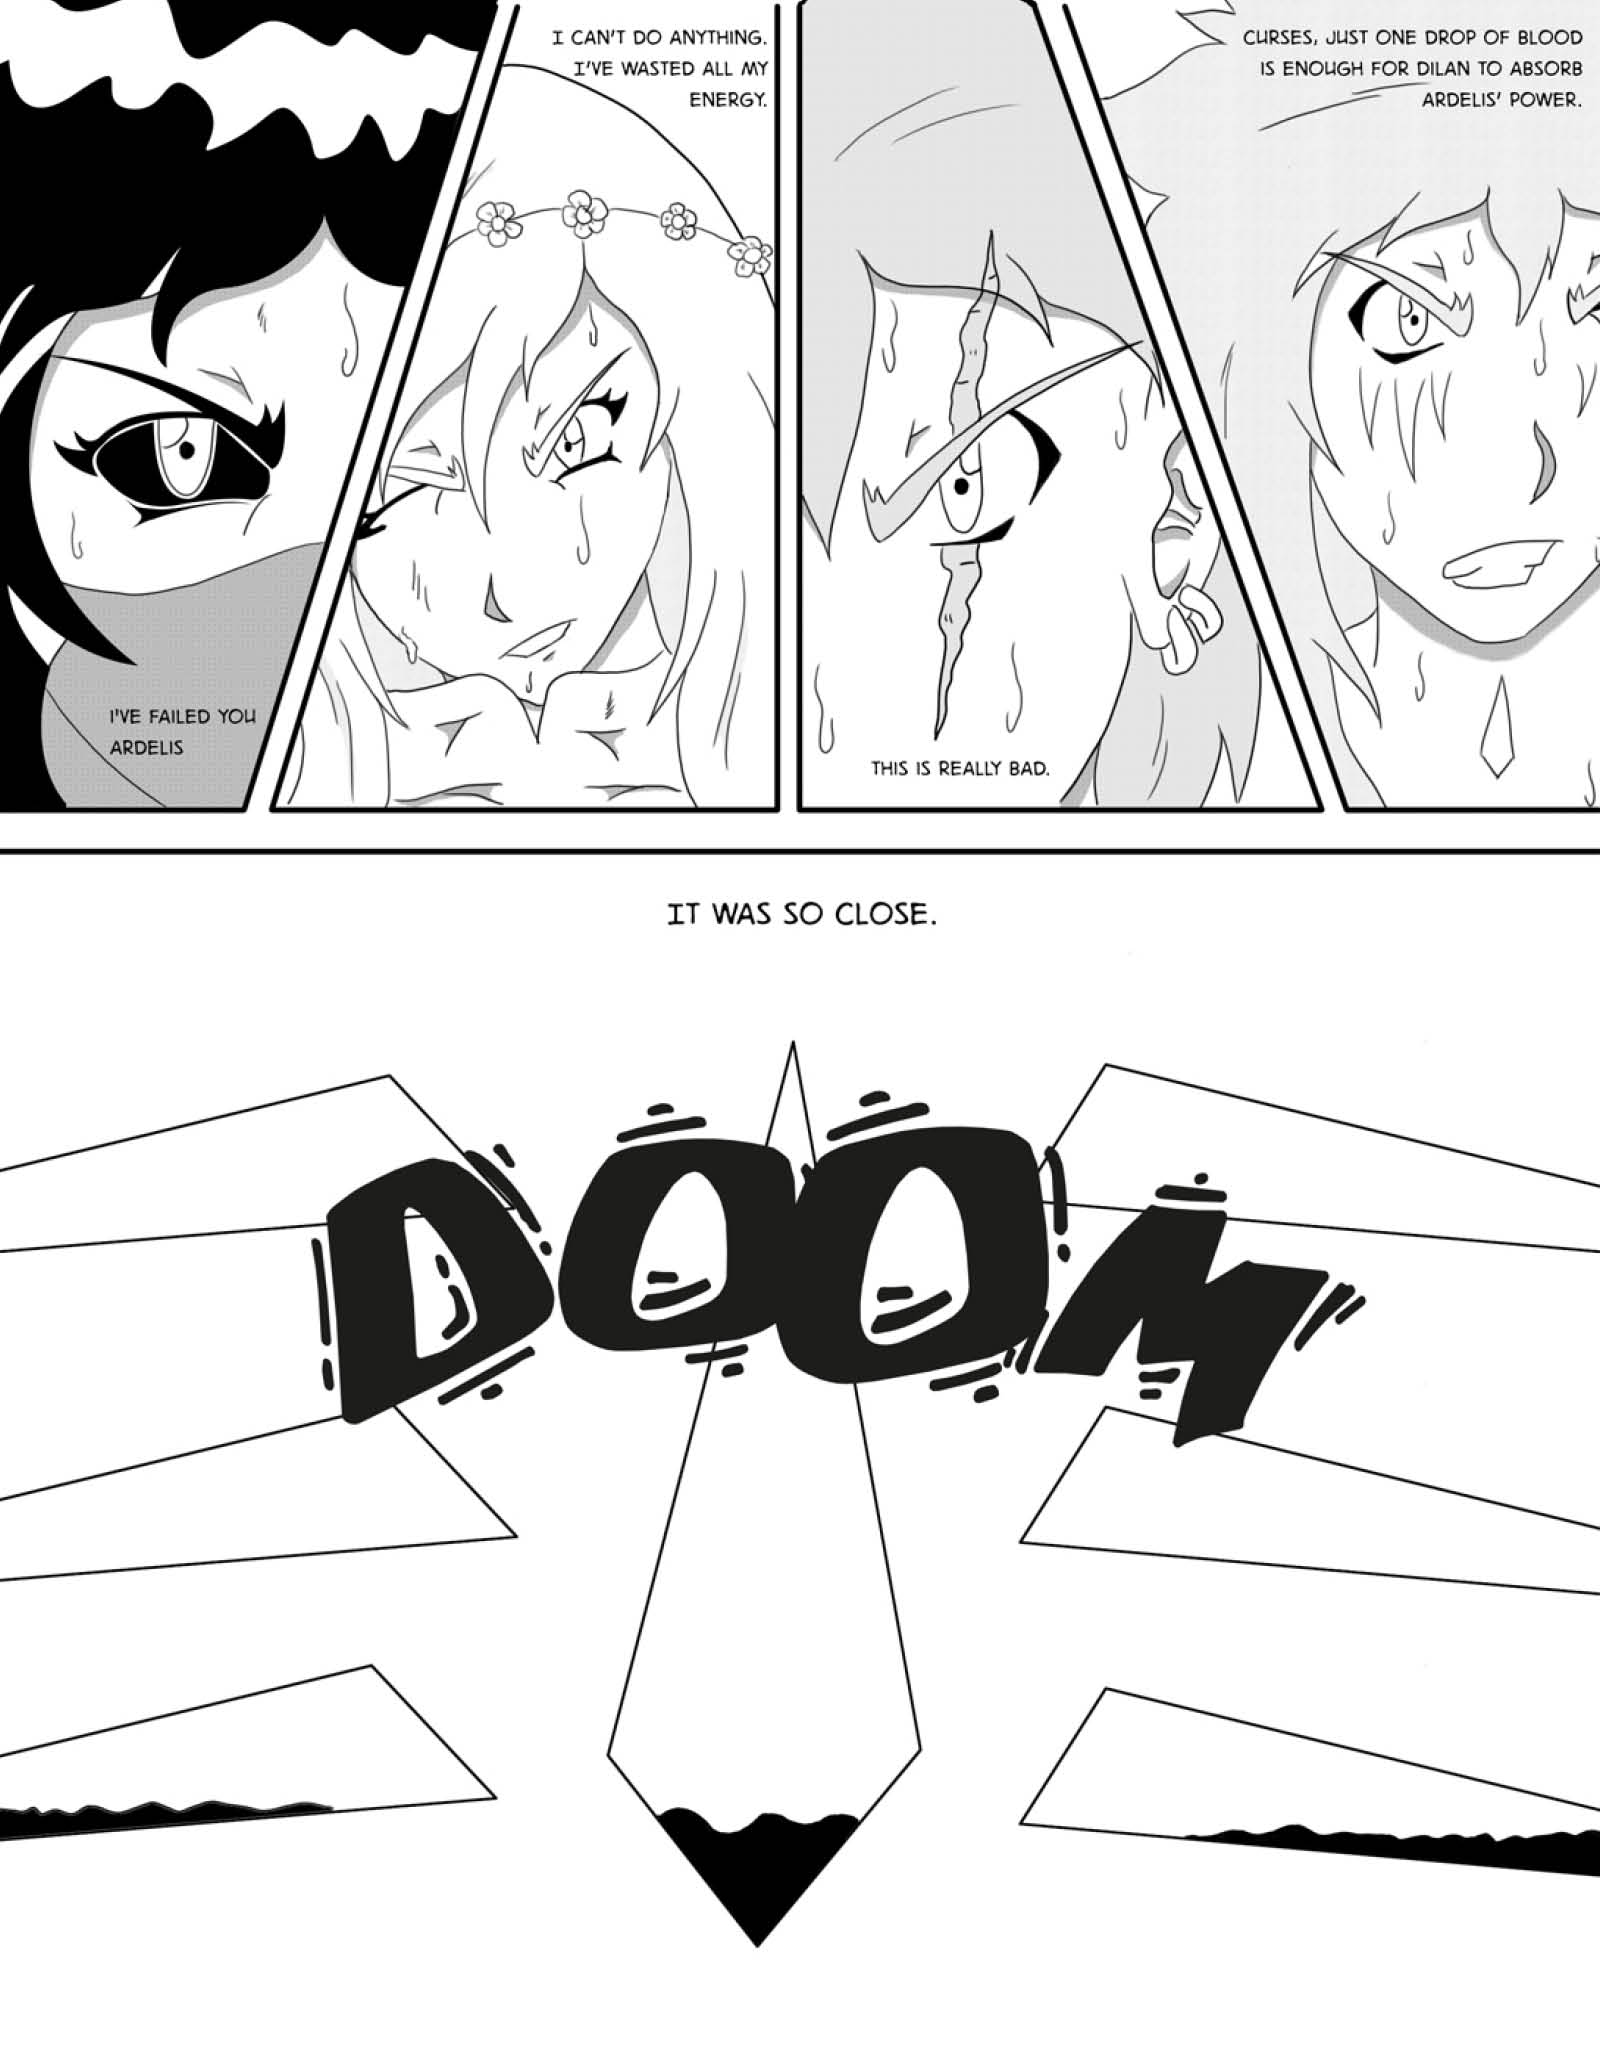 Series Dilan: the Chronicles of Covak - Chapter 8 - Page 19 - Language ENG